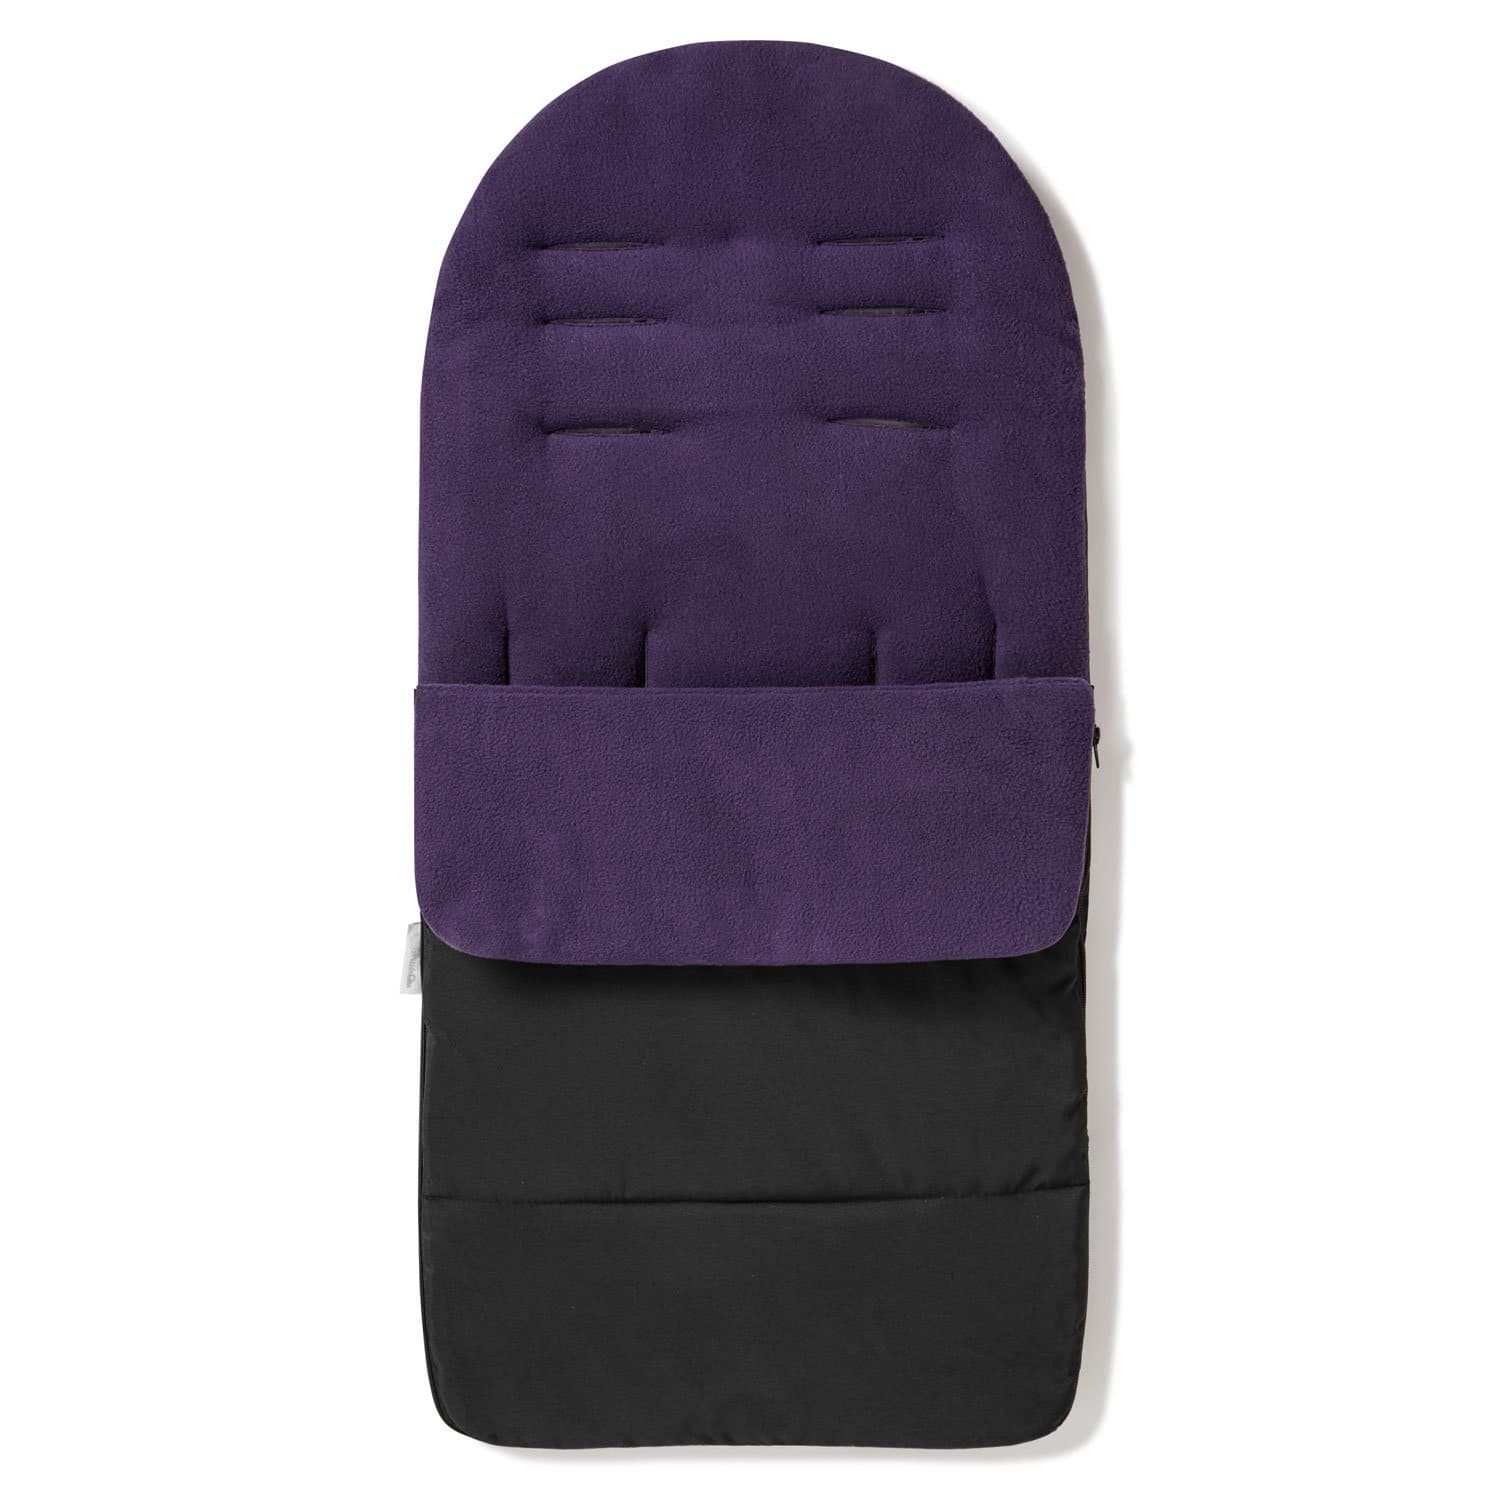 Premium Footmuff / Cosy Toes Compatible with Recaro - Plum Purple / Fits All Models | For Your Little One